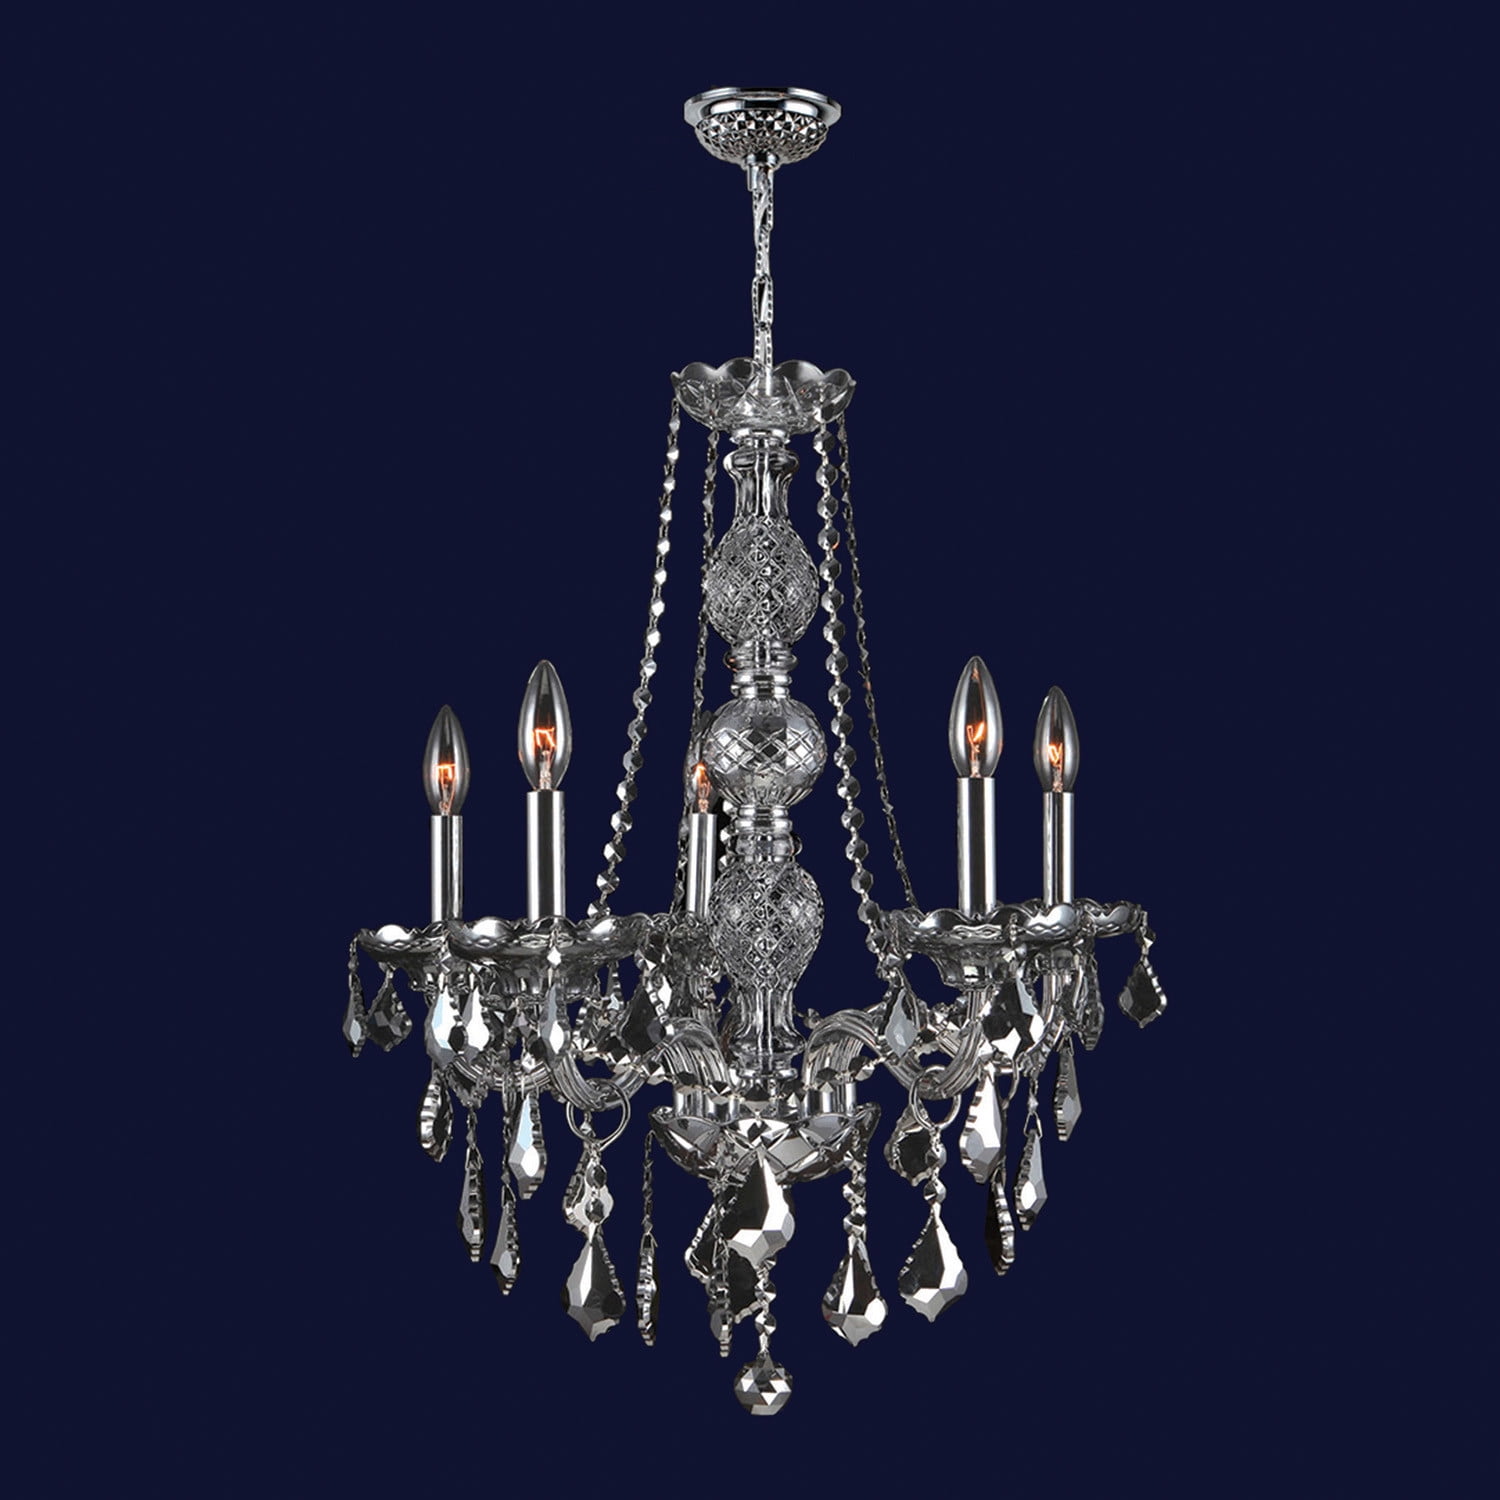 Provence Collection 5 Light Chrome Finish and Smoke Crystal Chandelier 21